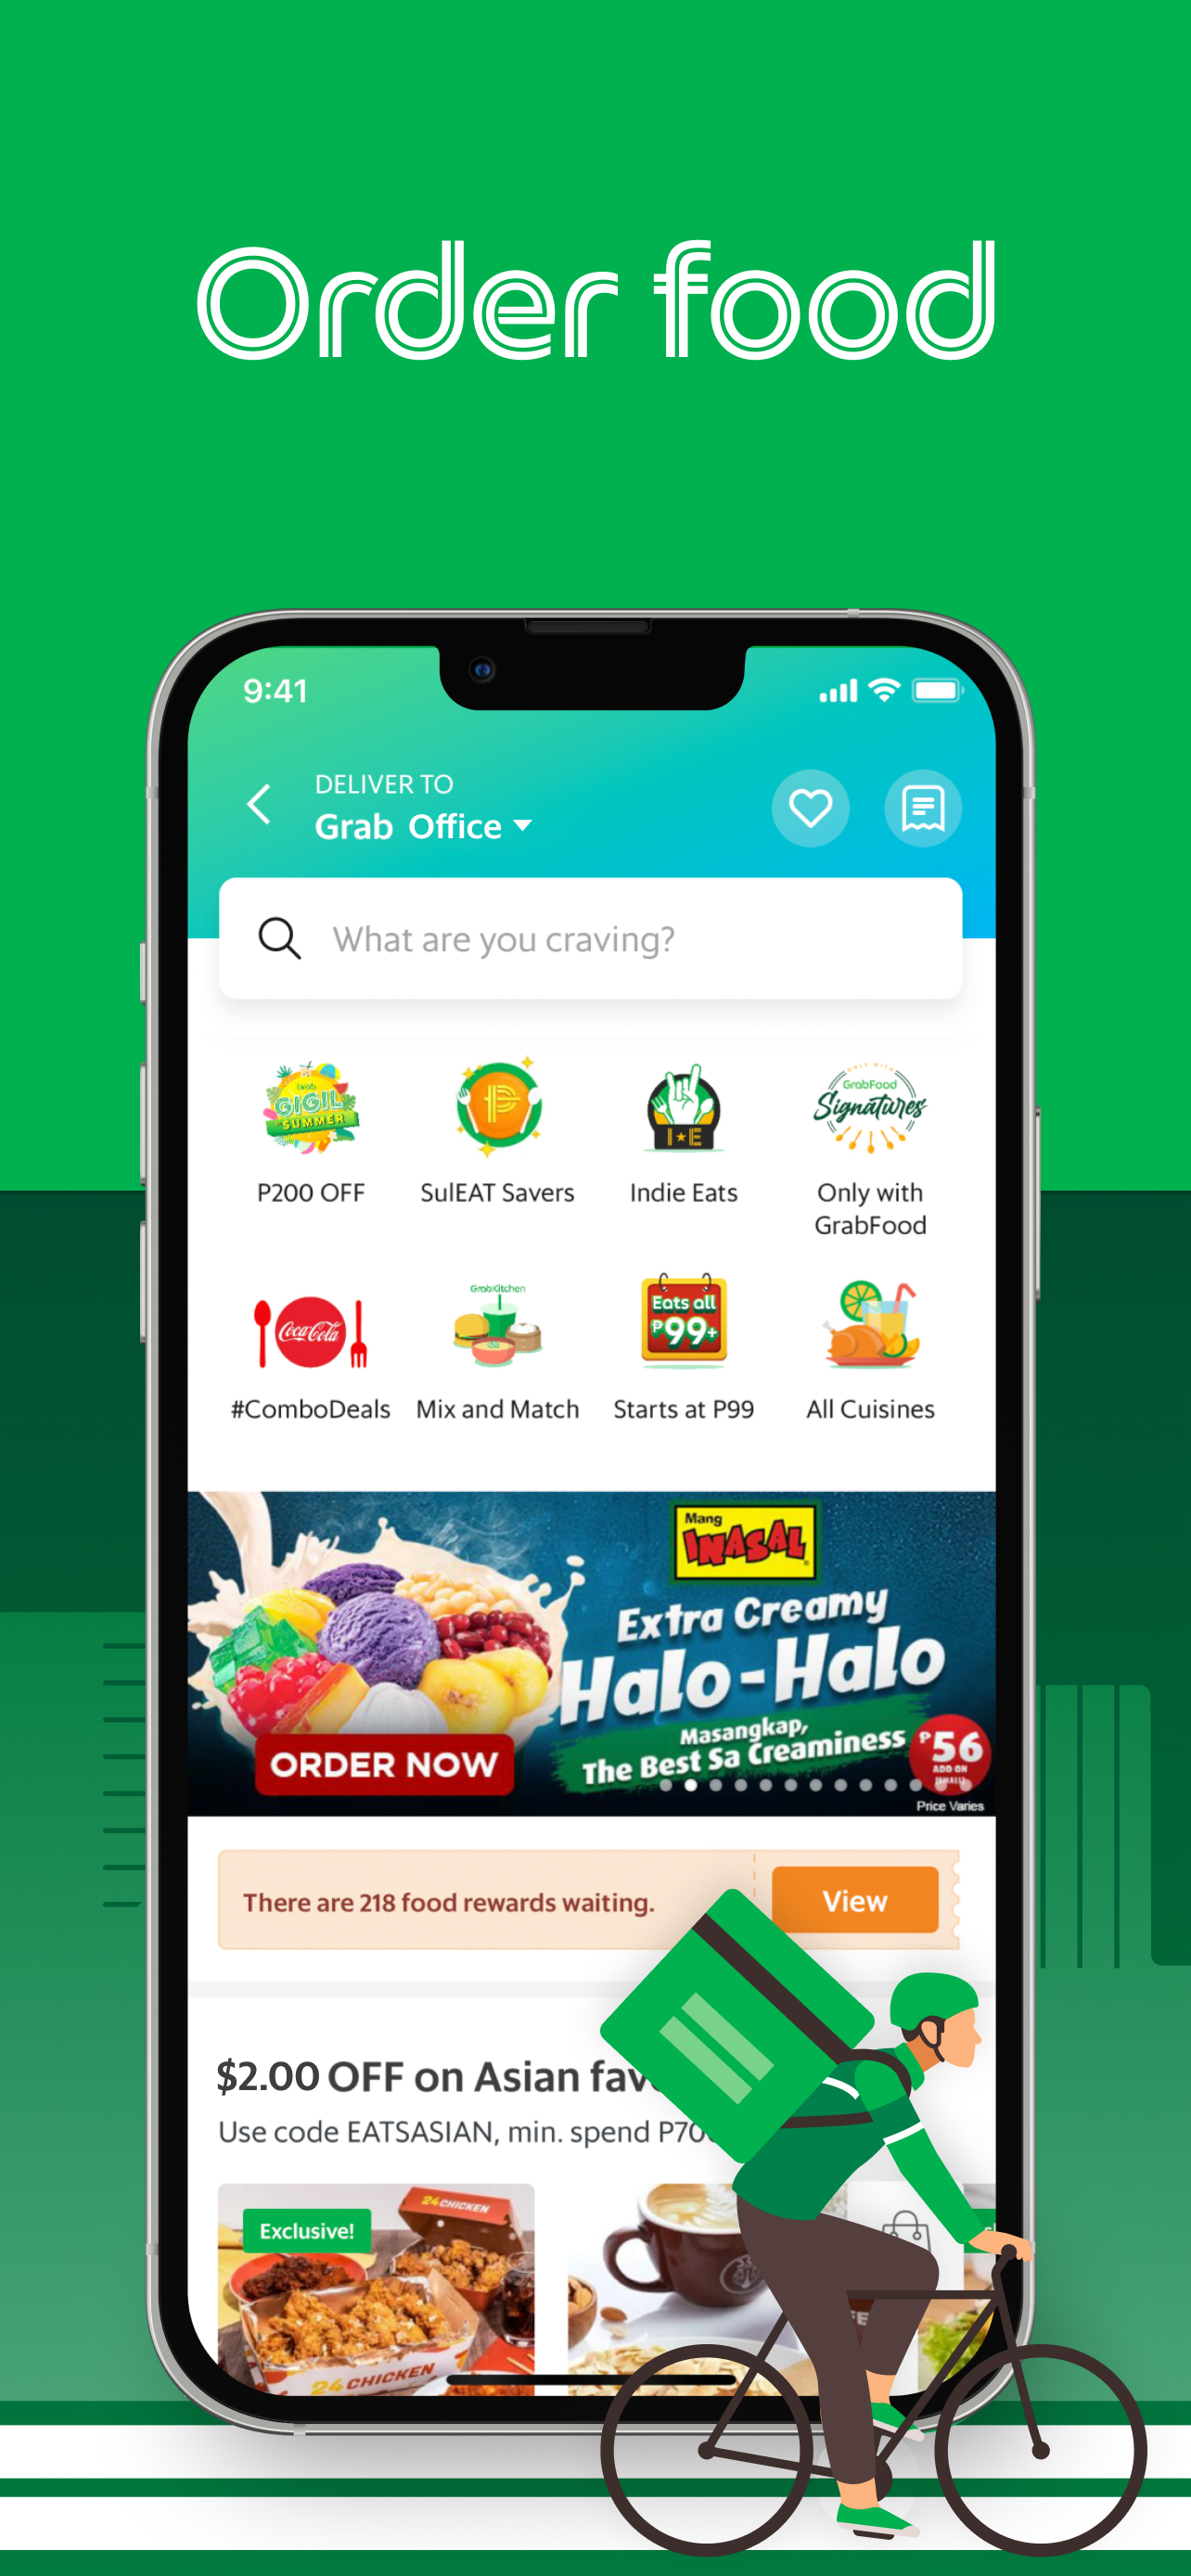 Grab: Taxi Ride, Food Delivery